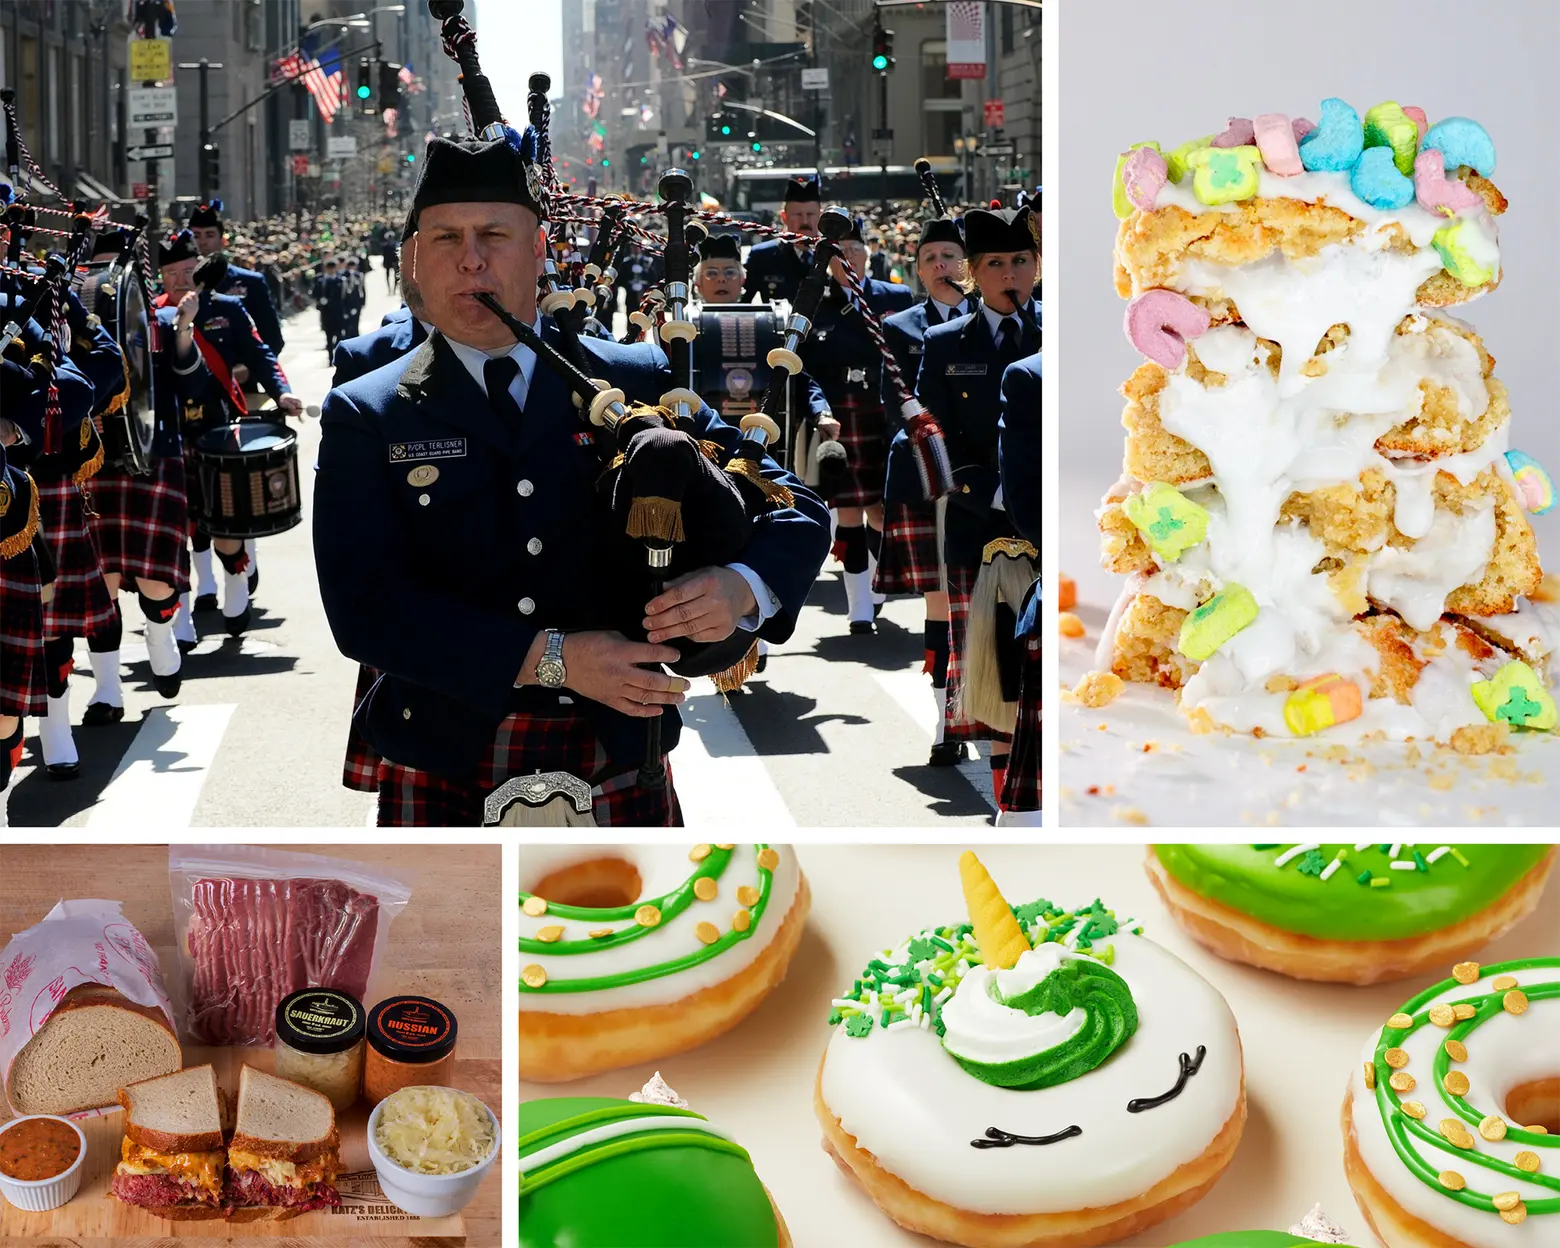 St. Patrick’s Day 2021 in NYC: Parades, treats, takeout, and more